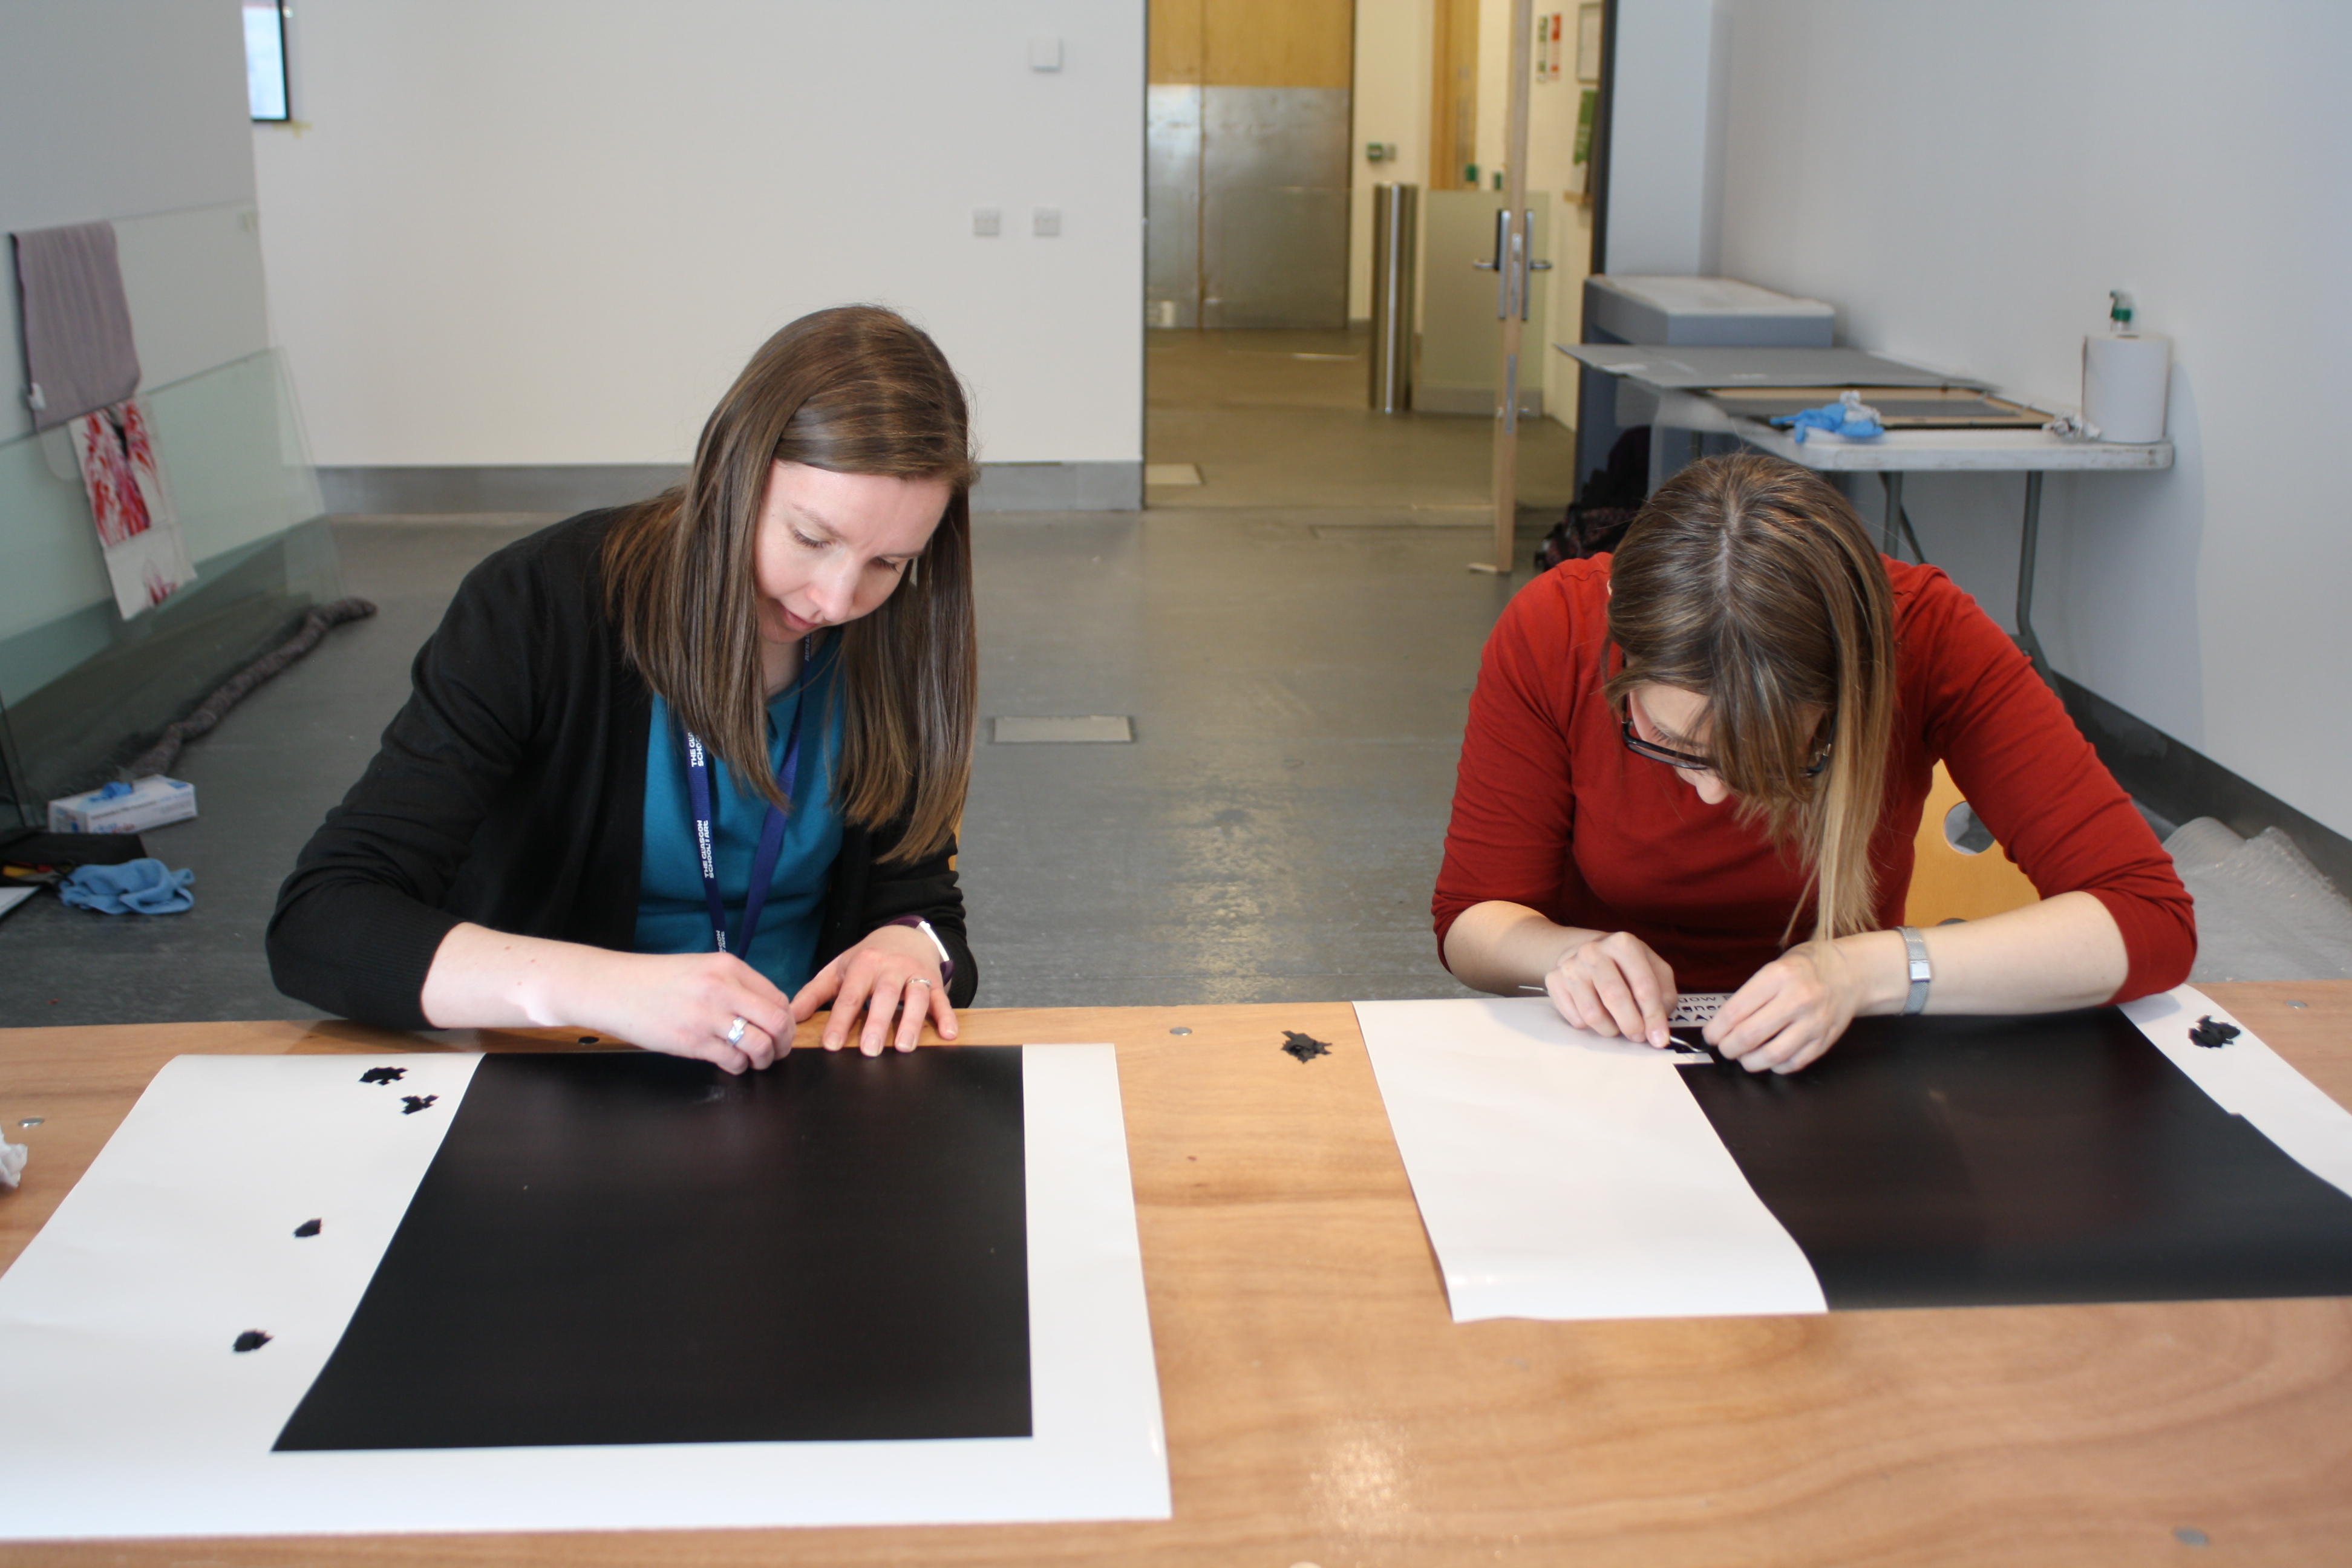 Skills for the Future trainee Jennifer Lightbody and Archives and Collections Manager Susannah Waters try their hand at vinyl weeding!